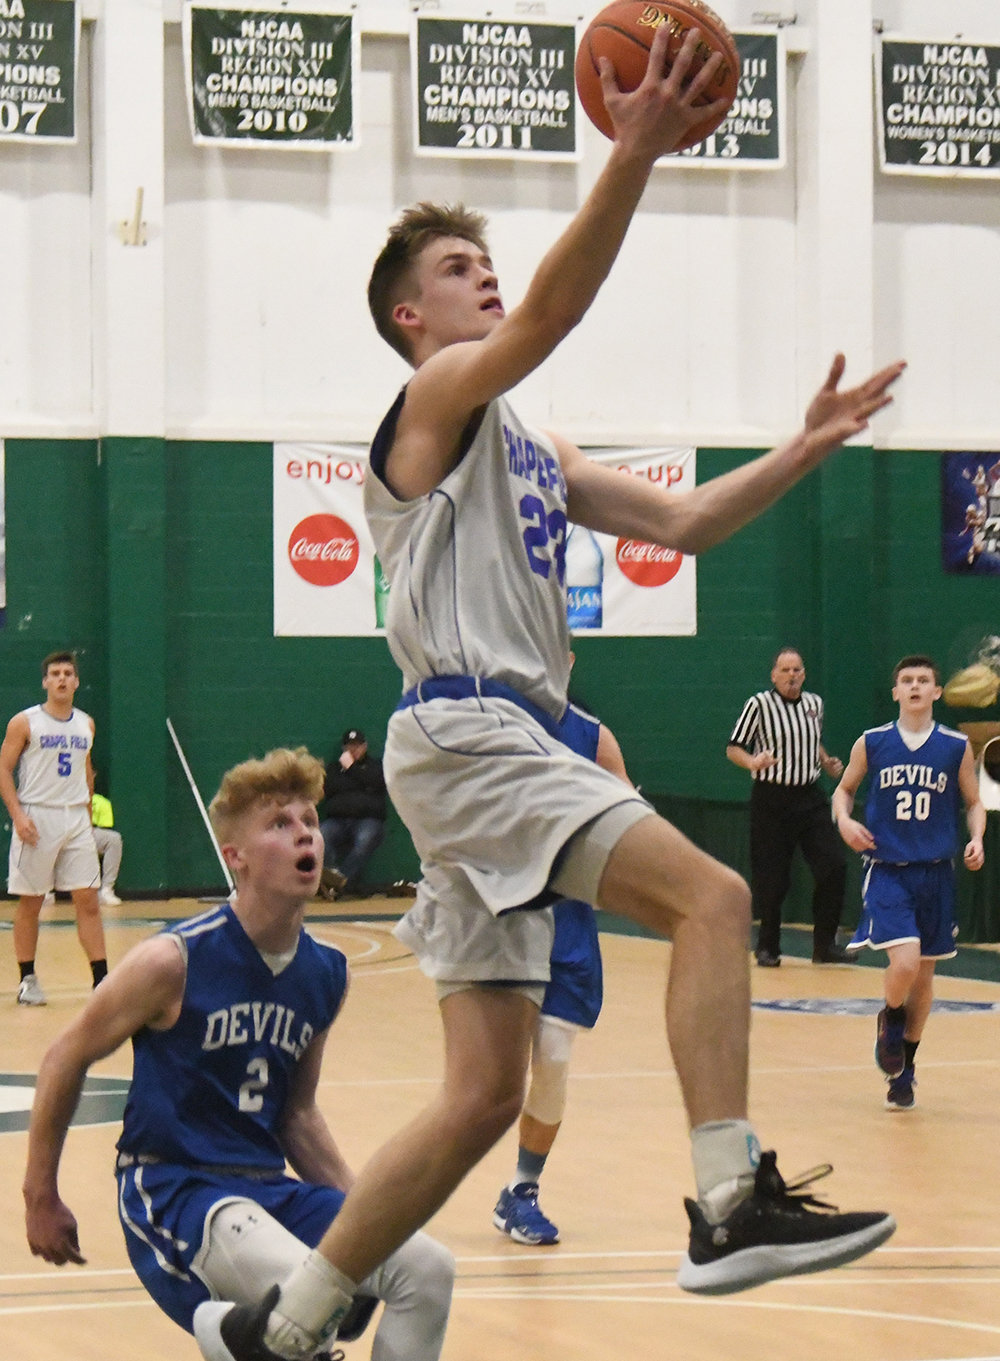 Chapel Field's Noah Swart goes up for a basket as Roscoe's Aiden Johnston trails the play during Wednesday's Section 9 Class D championship boys' basketball game at SUNY Sullivan in Loch Sheldrake.